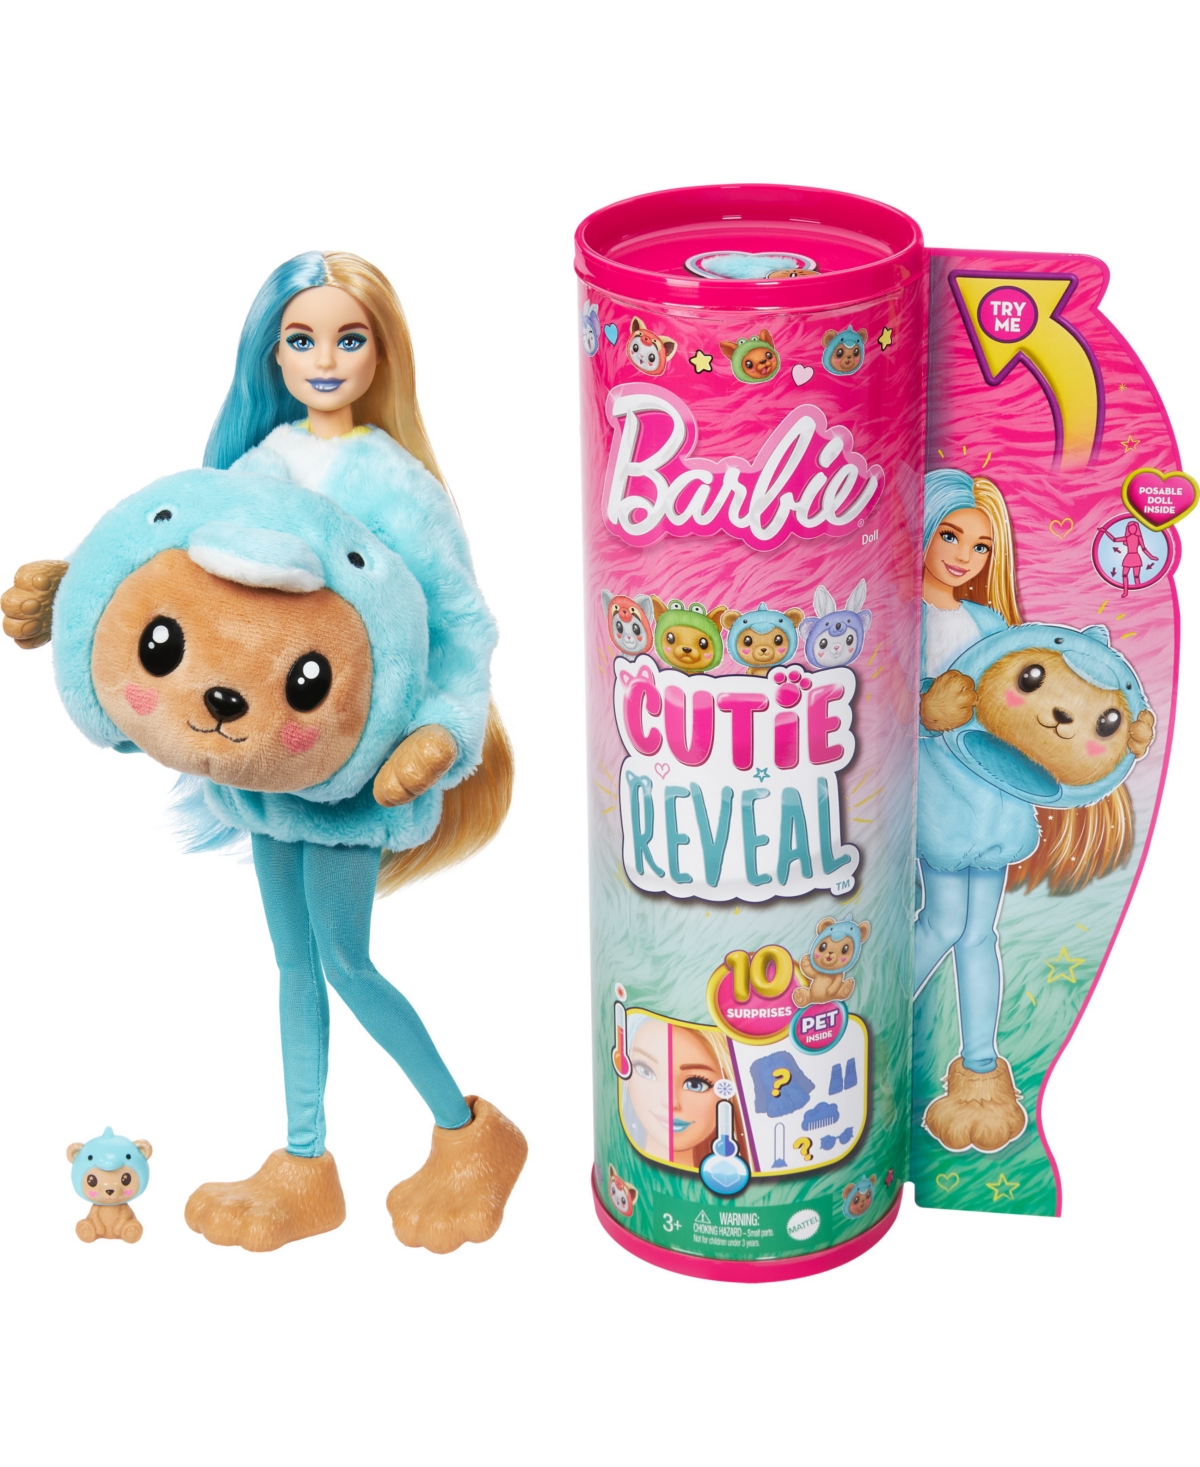 Barbie Kids' Cutie Reveal Costume-themed Series Doll And Accessories With 10 Surprises, Teddy Bear As Dolphin In Multi